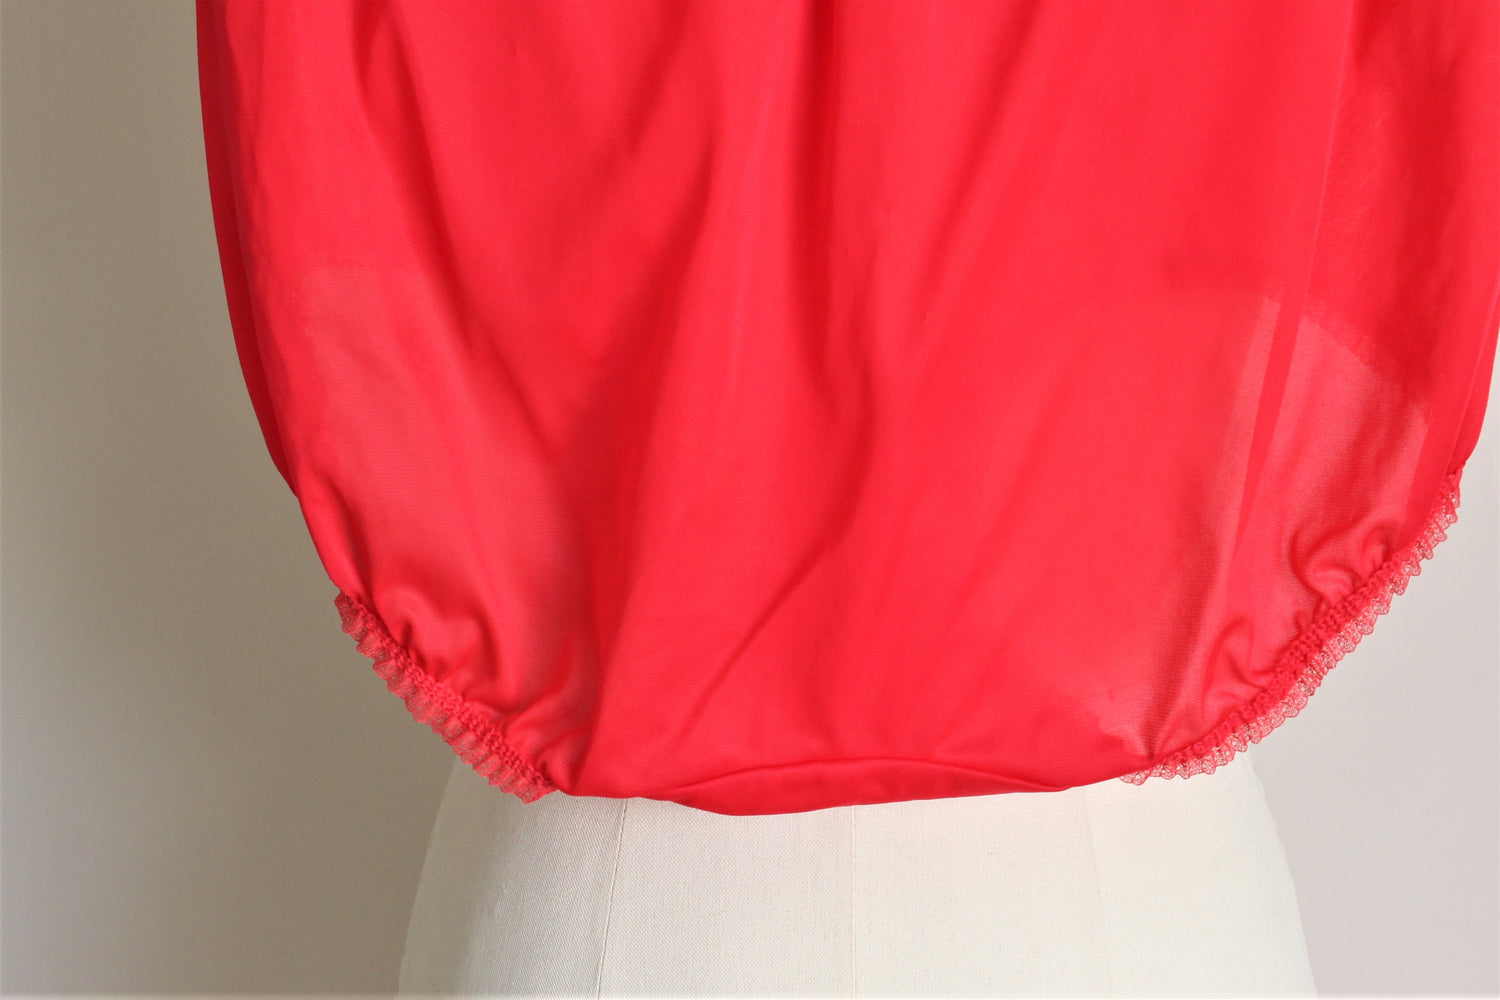 Vintage 1970s JC Penneys Gaymode High Waisted Red Nylon Panty